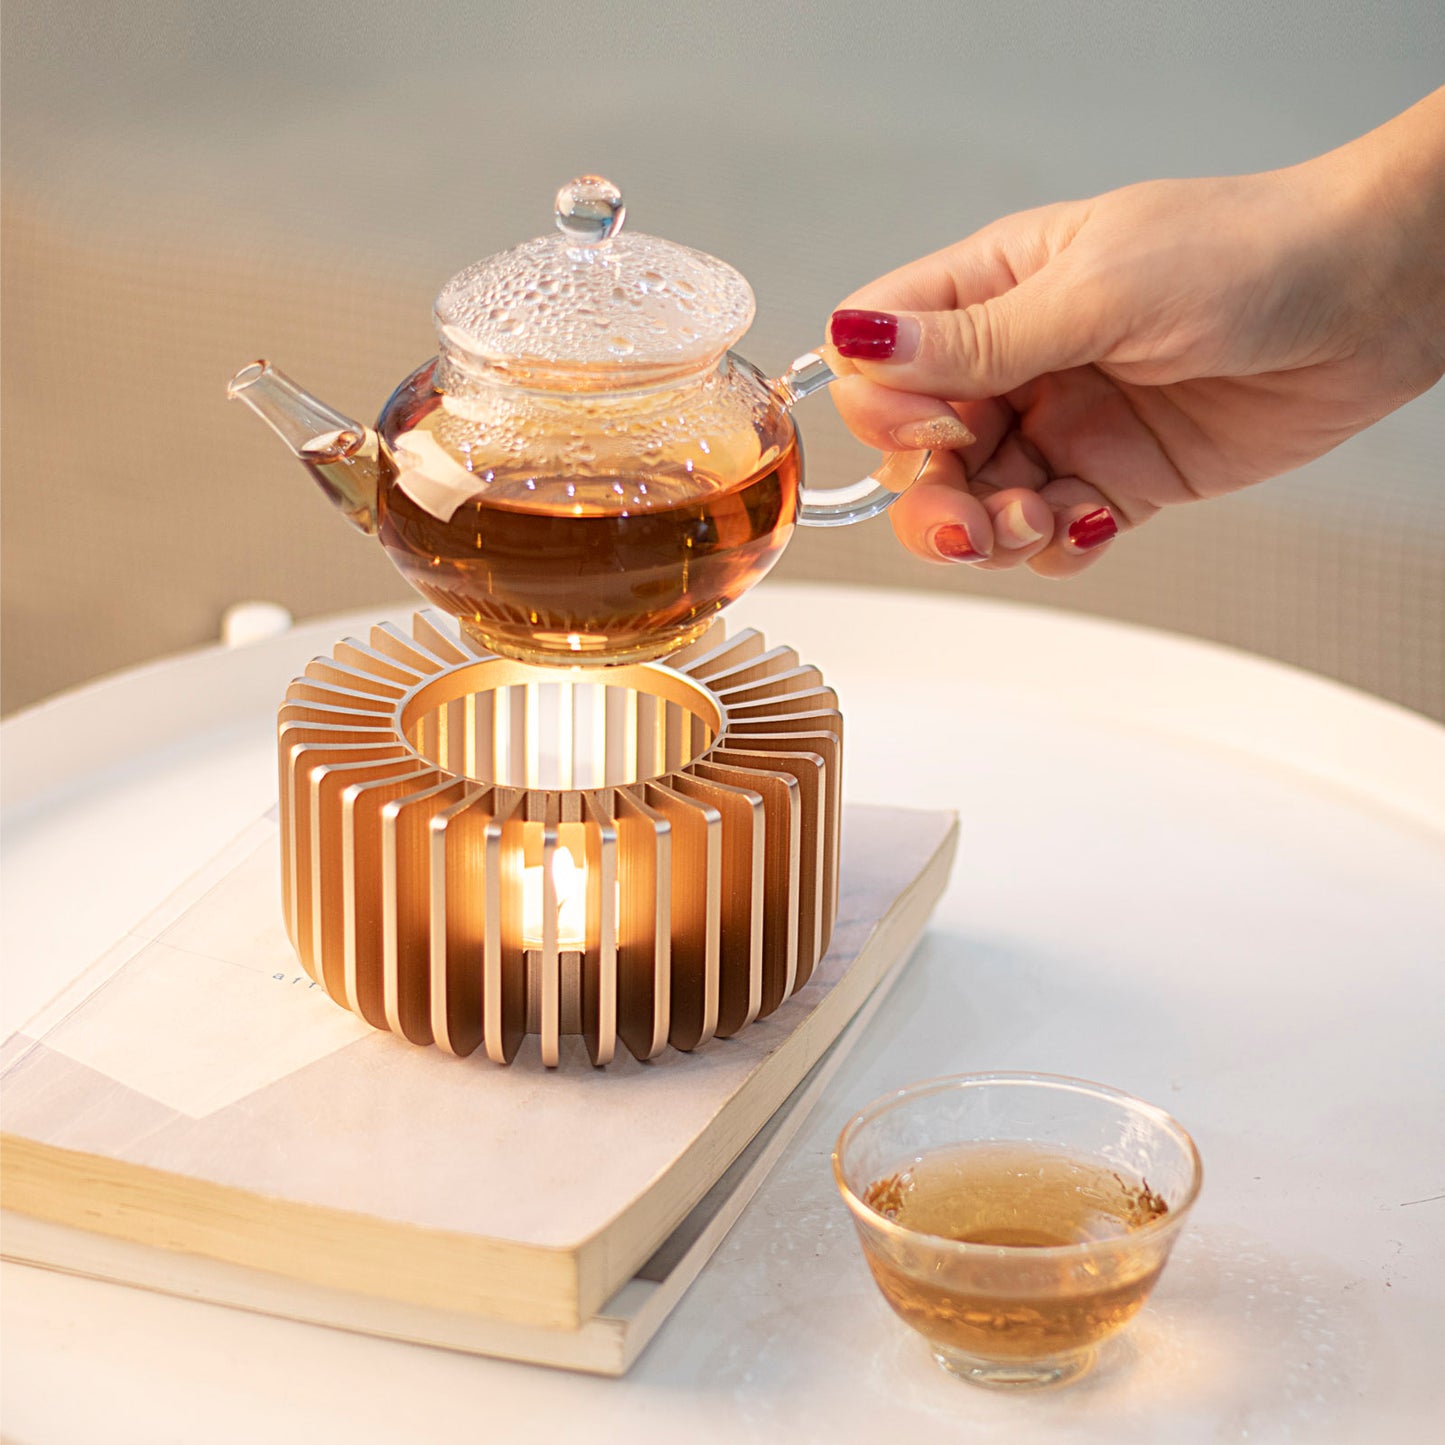 Universal Teapot Warmer - Beautiful Aluminum alloy Warmers|Tea Pot Heater in Frosted Gold with Ornate Design.